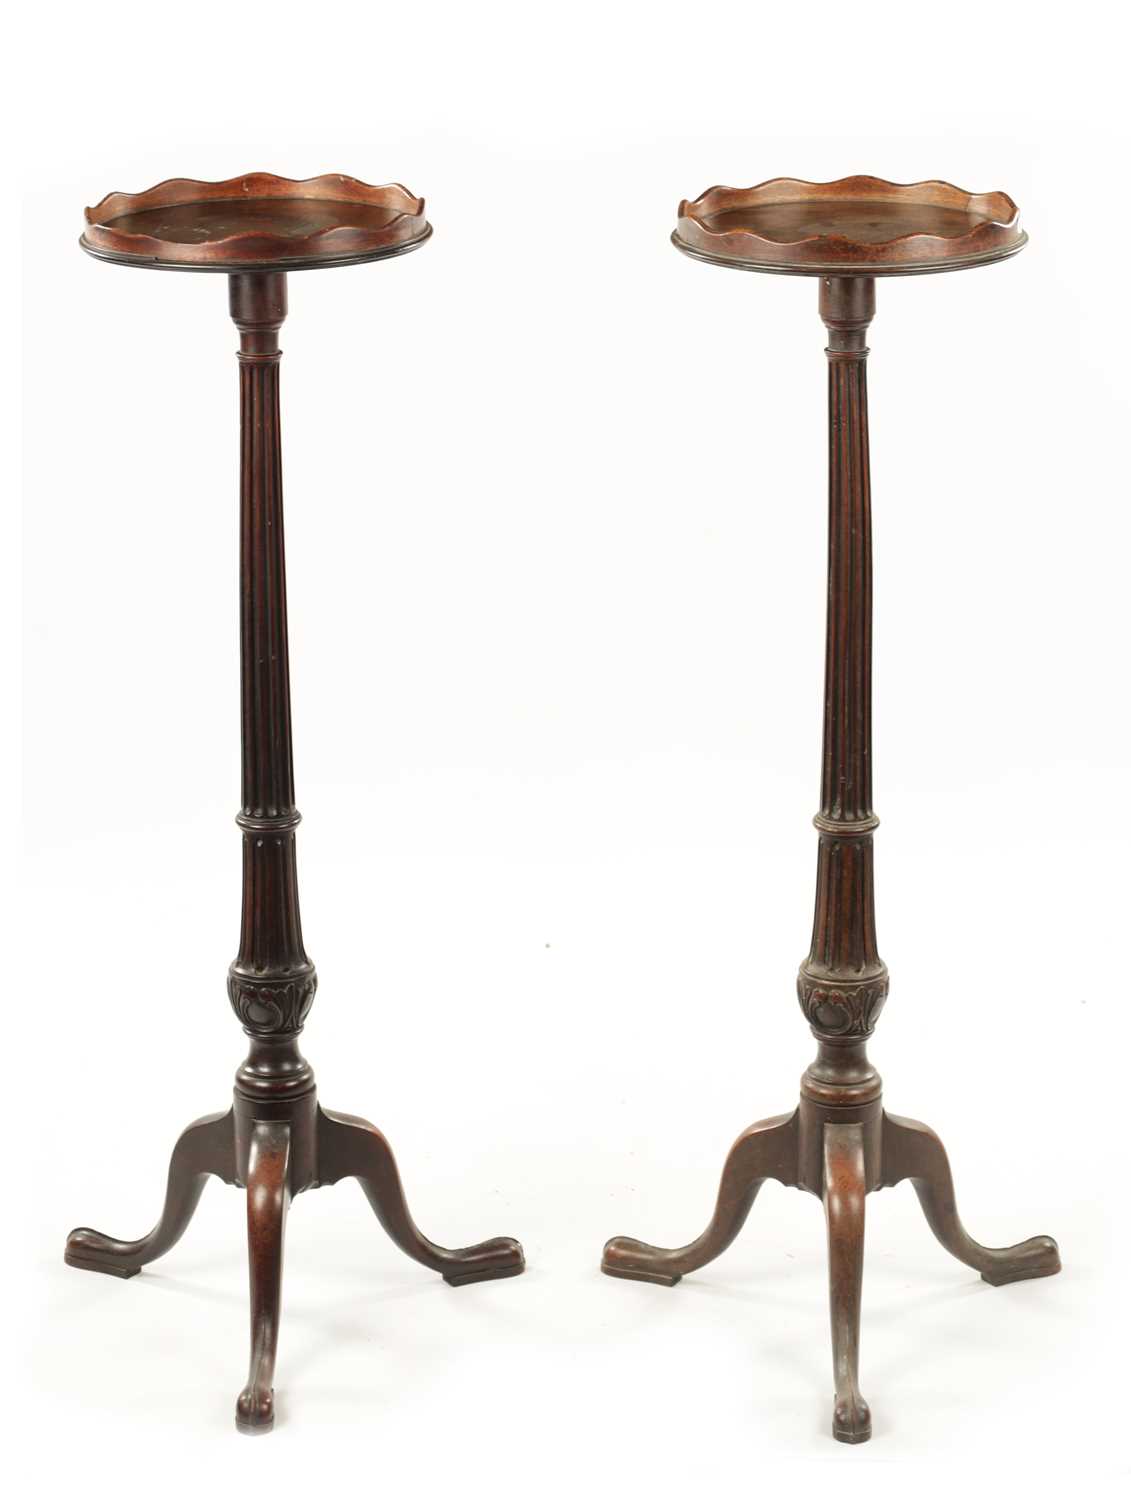 Lot 313 - A FINE PAIR OF 18TH CENTURY CHIPPENDALE PERIOD MAHOGANY TORCHERES